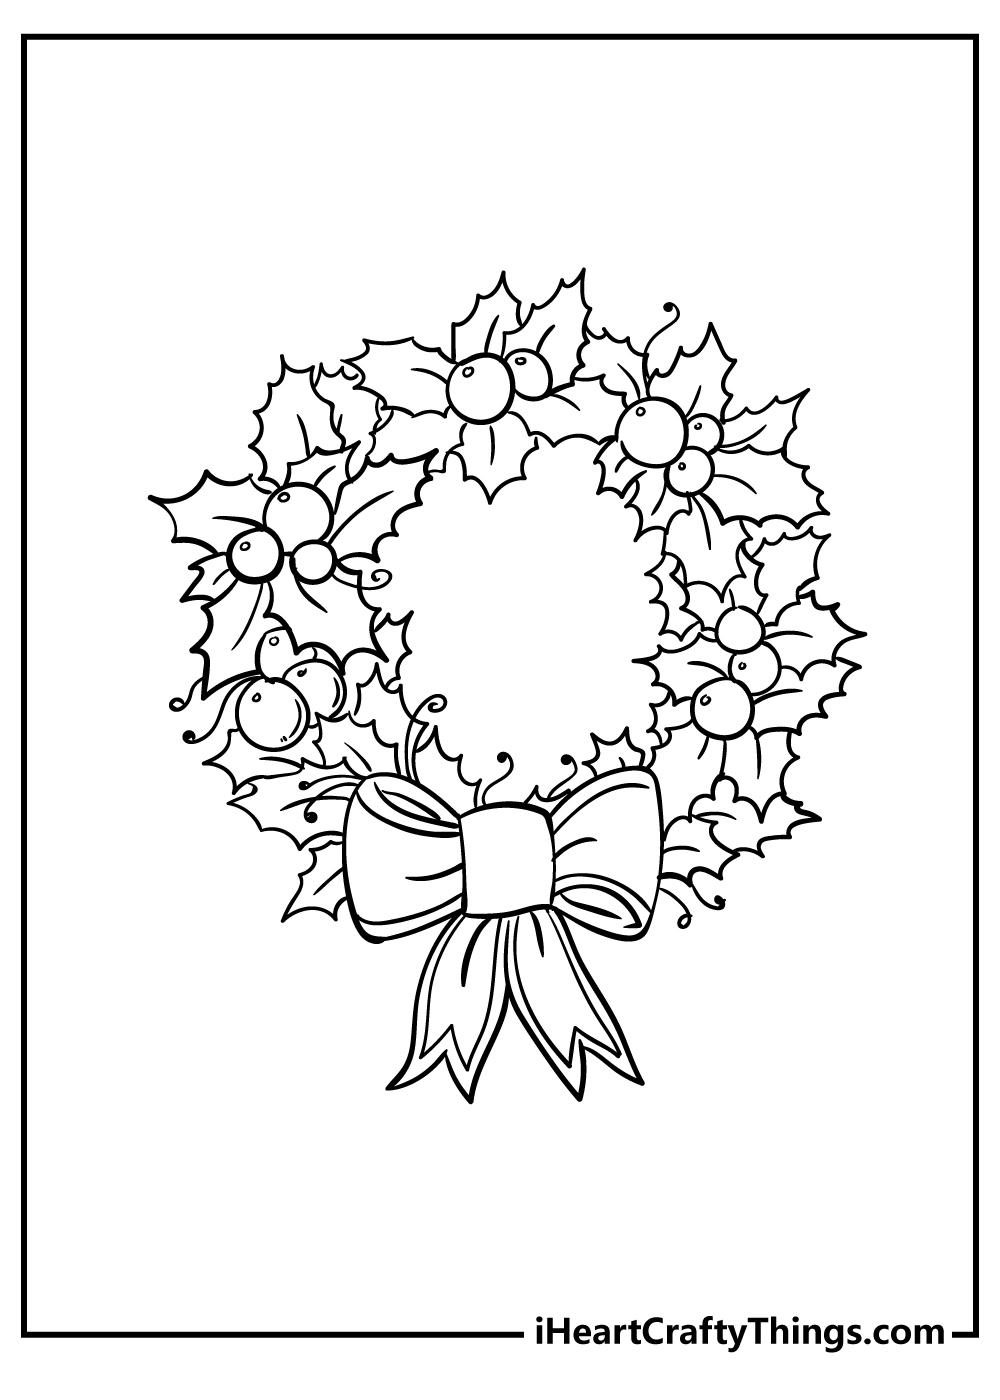 Christmas coloring pages free printable